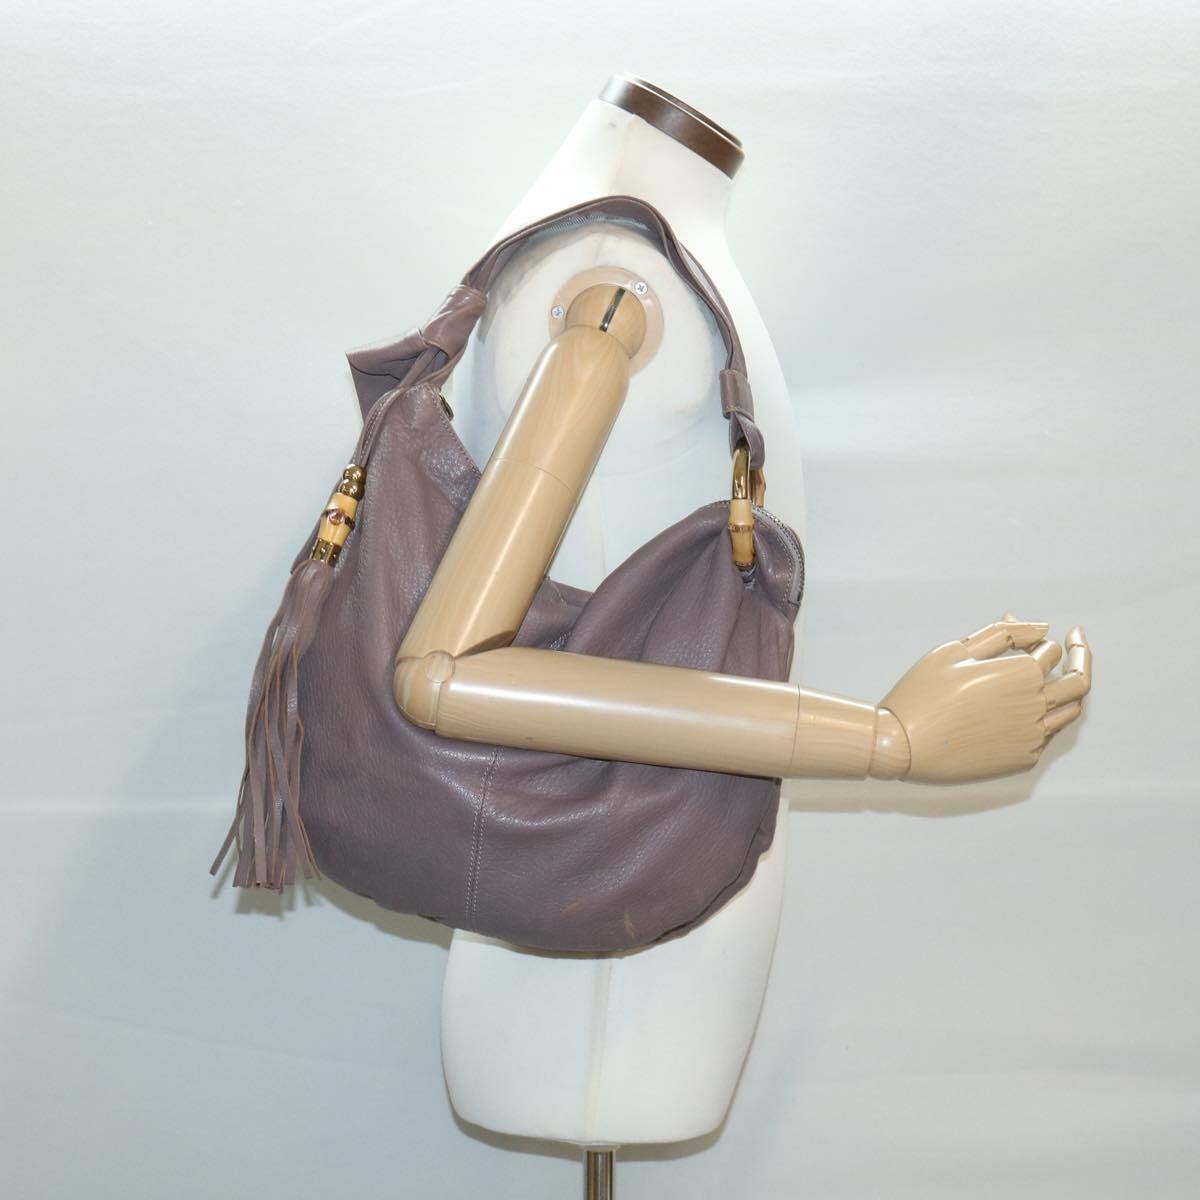 Bohemian, Gucci, supple mocha brown leather, XL hobo style, shoulder purse with gold & bamboo accents. a thick tassel zipper pull accent